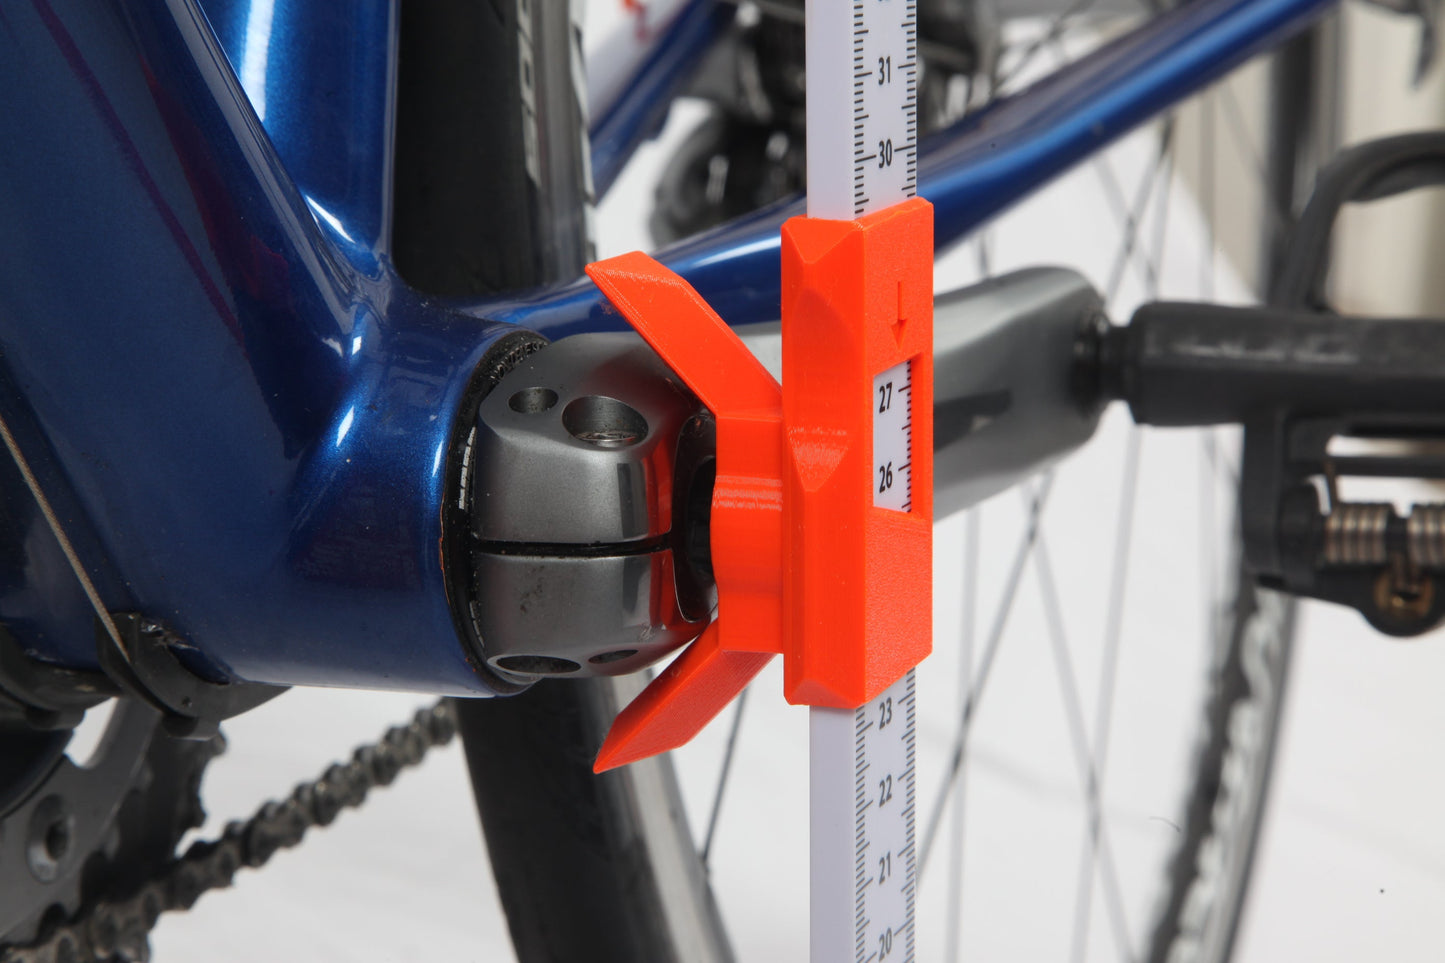 Universal 'V' Adaptor for Bike Measurement and Setup tool - NOT INCLUDED in V6 tool